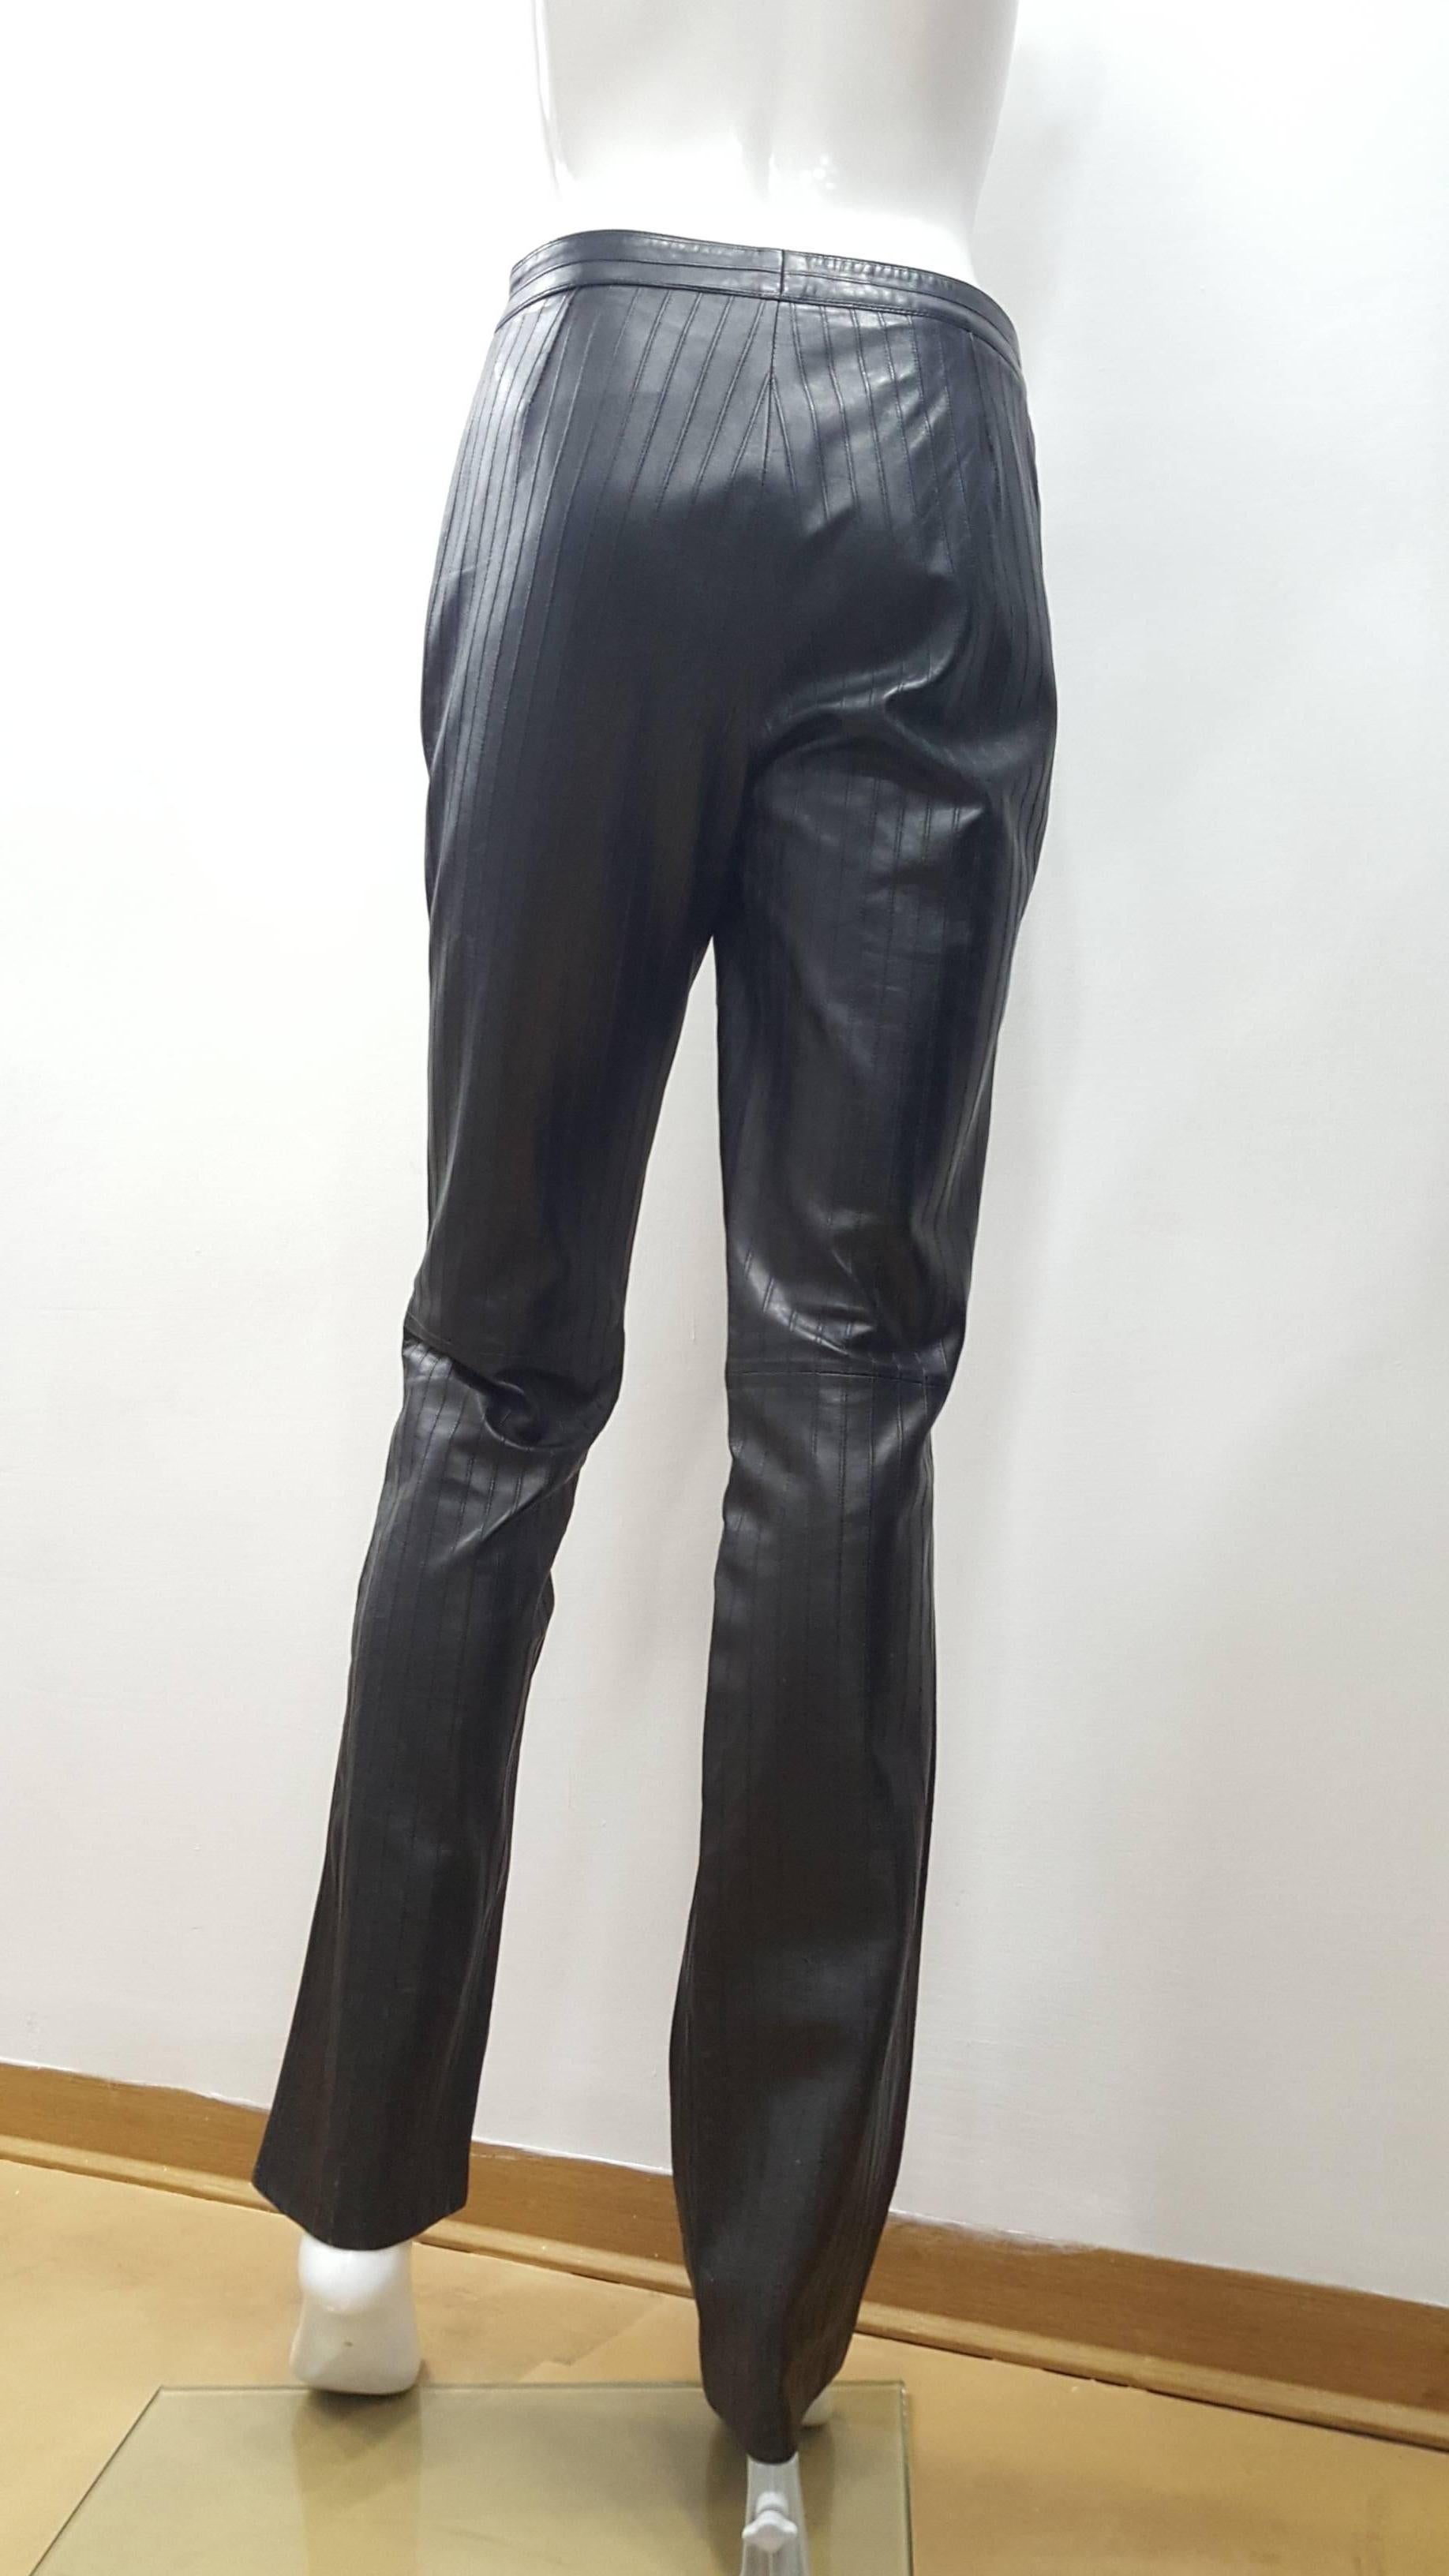 1990s Gucci Iconic Must Have black leather trousers by Tom Ford
in italian size range 42
Totally made with extra smoothy leather 
Lining is totally made in cupro (silk)